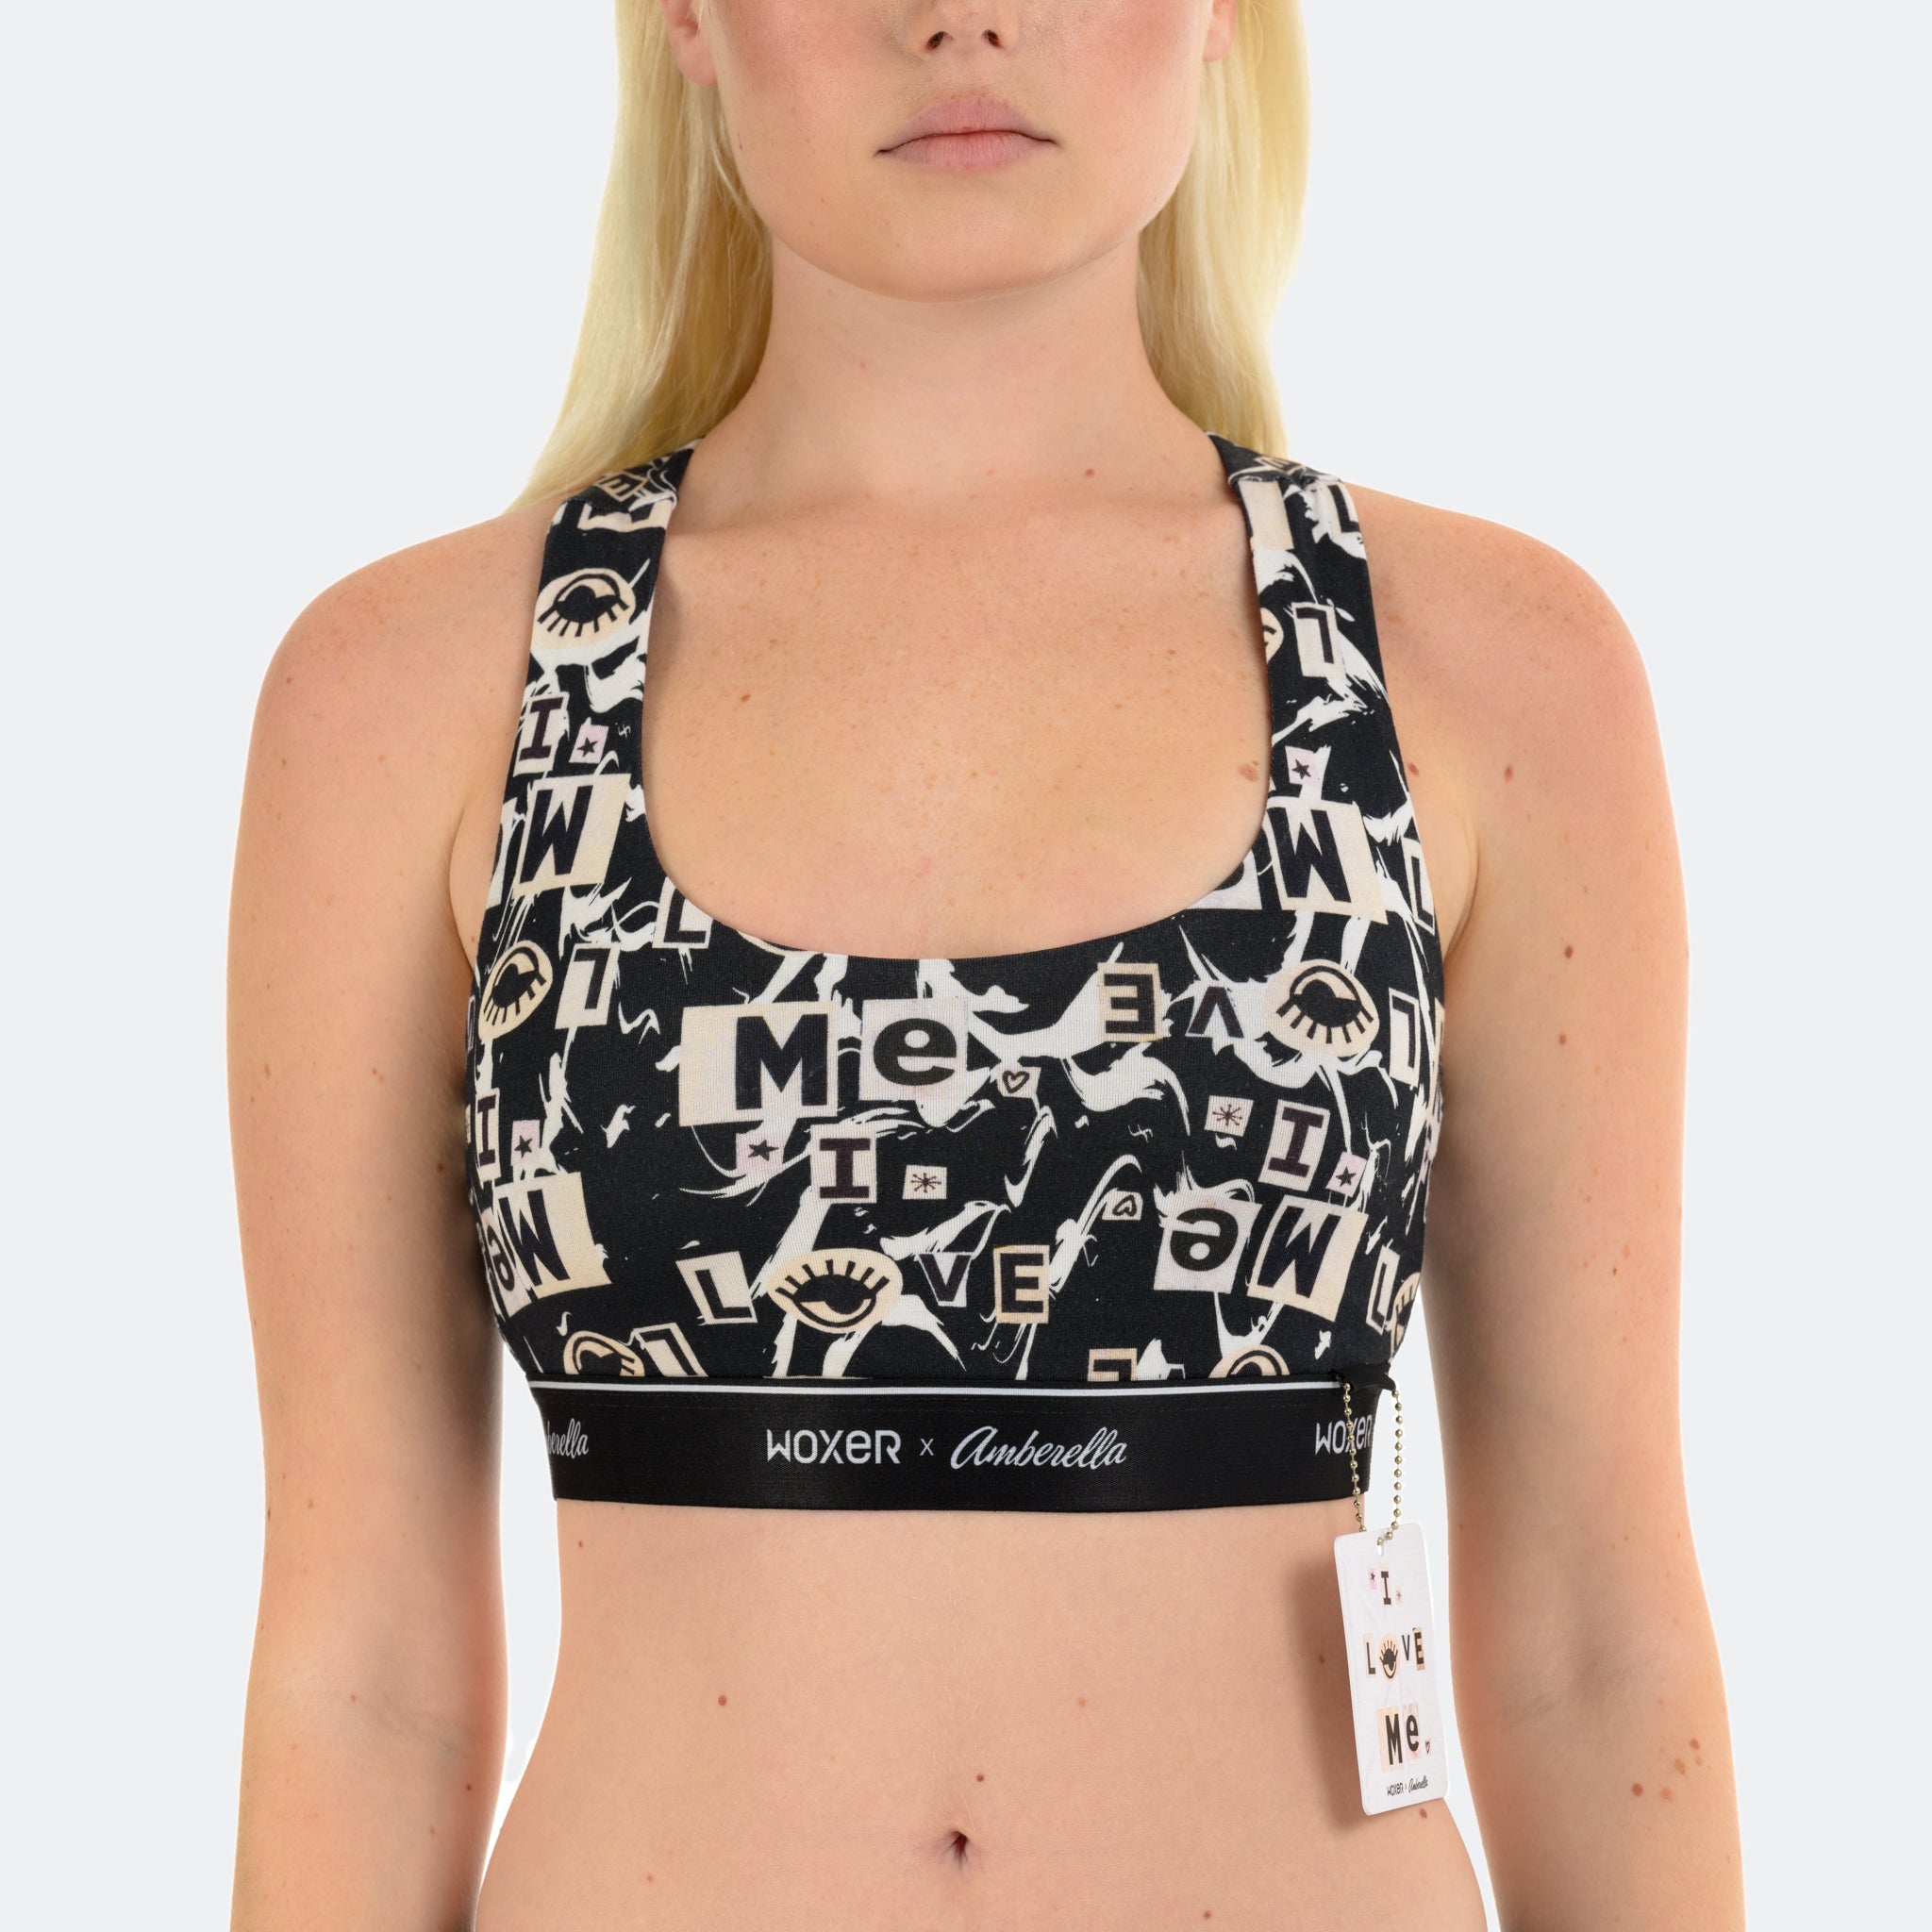 Boss 2.0 / Supportive Lounge Bralette / Woxer